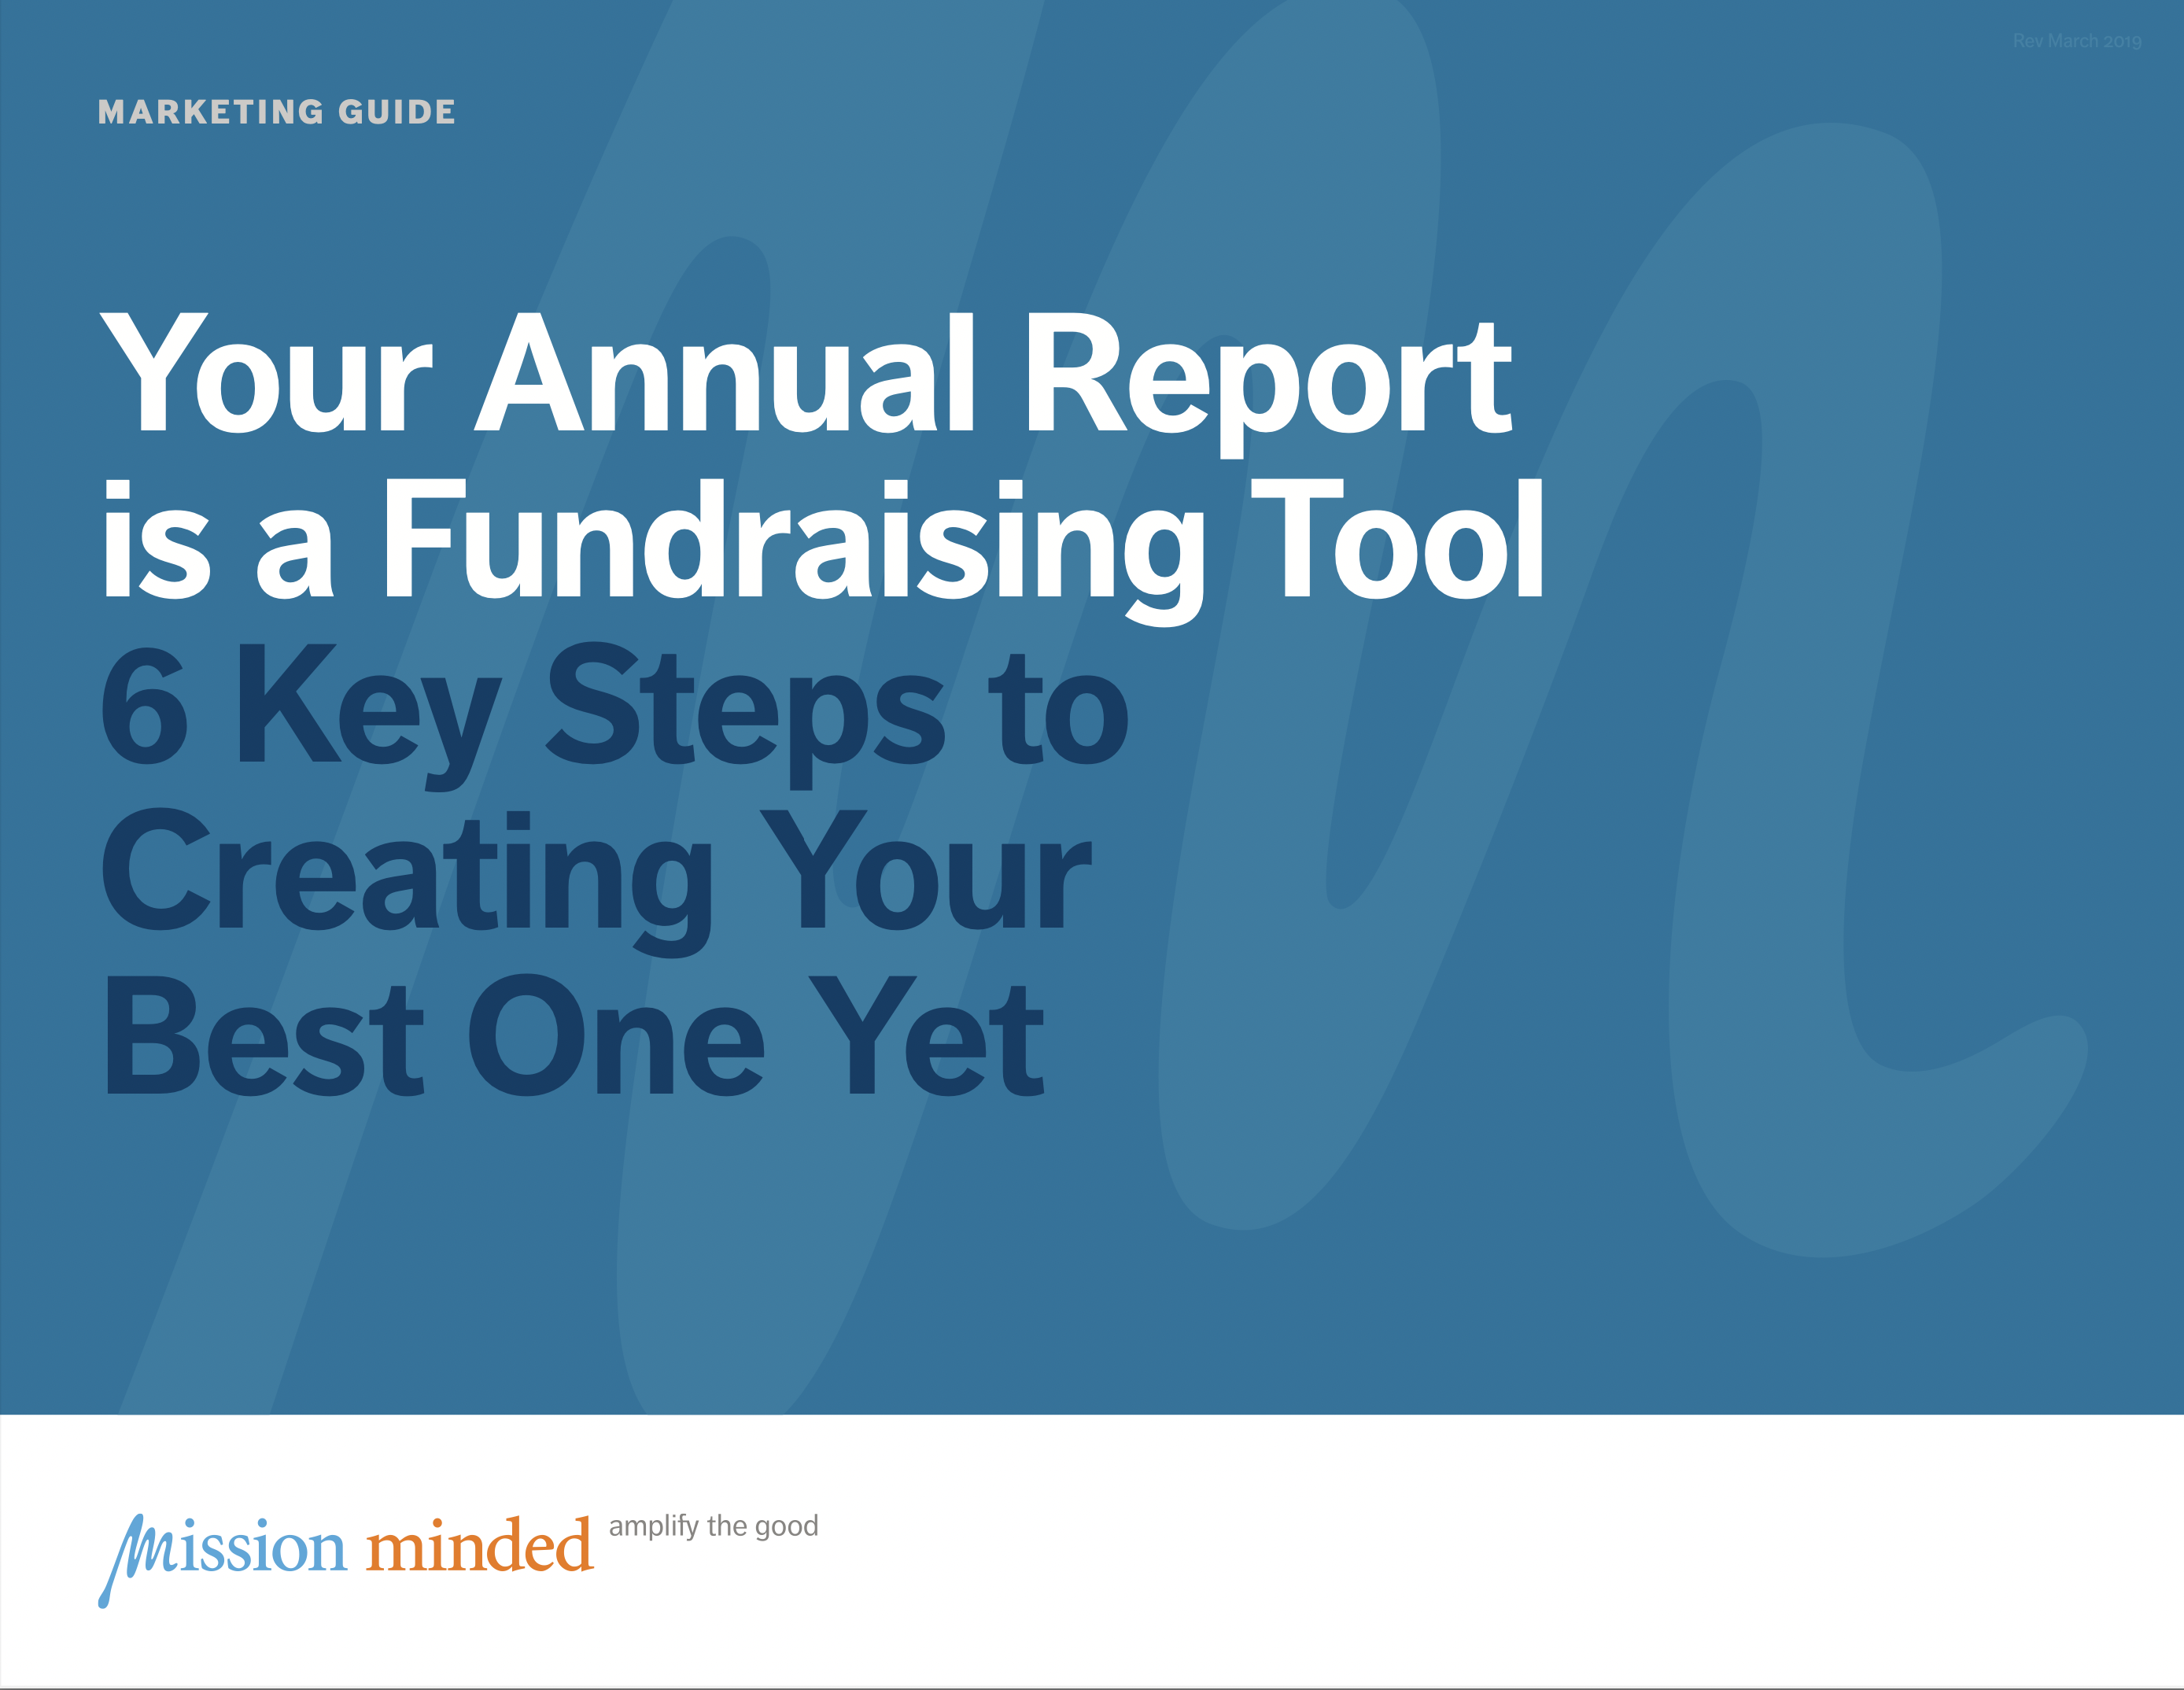 Your Annual Report is a Fundraising Tool | 6 Key Steps to Creating Your Best One Yet